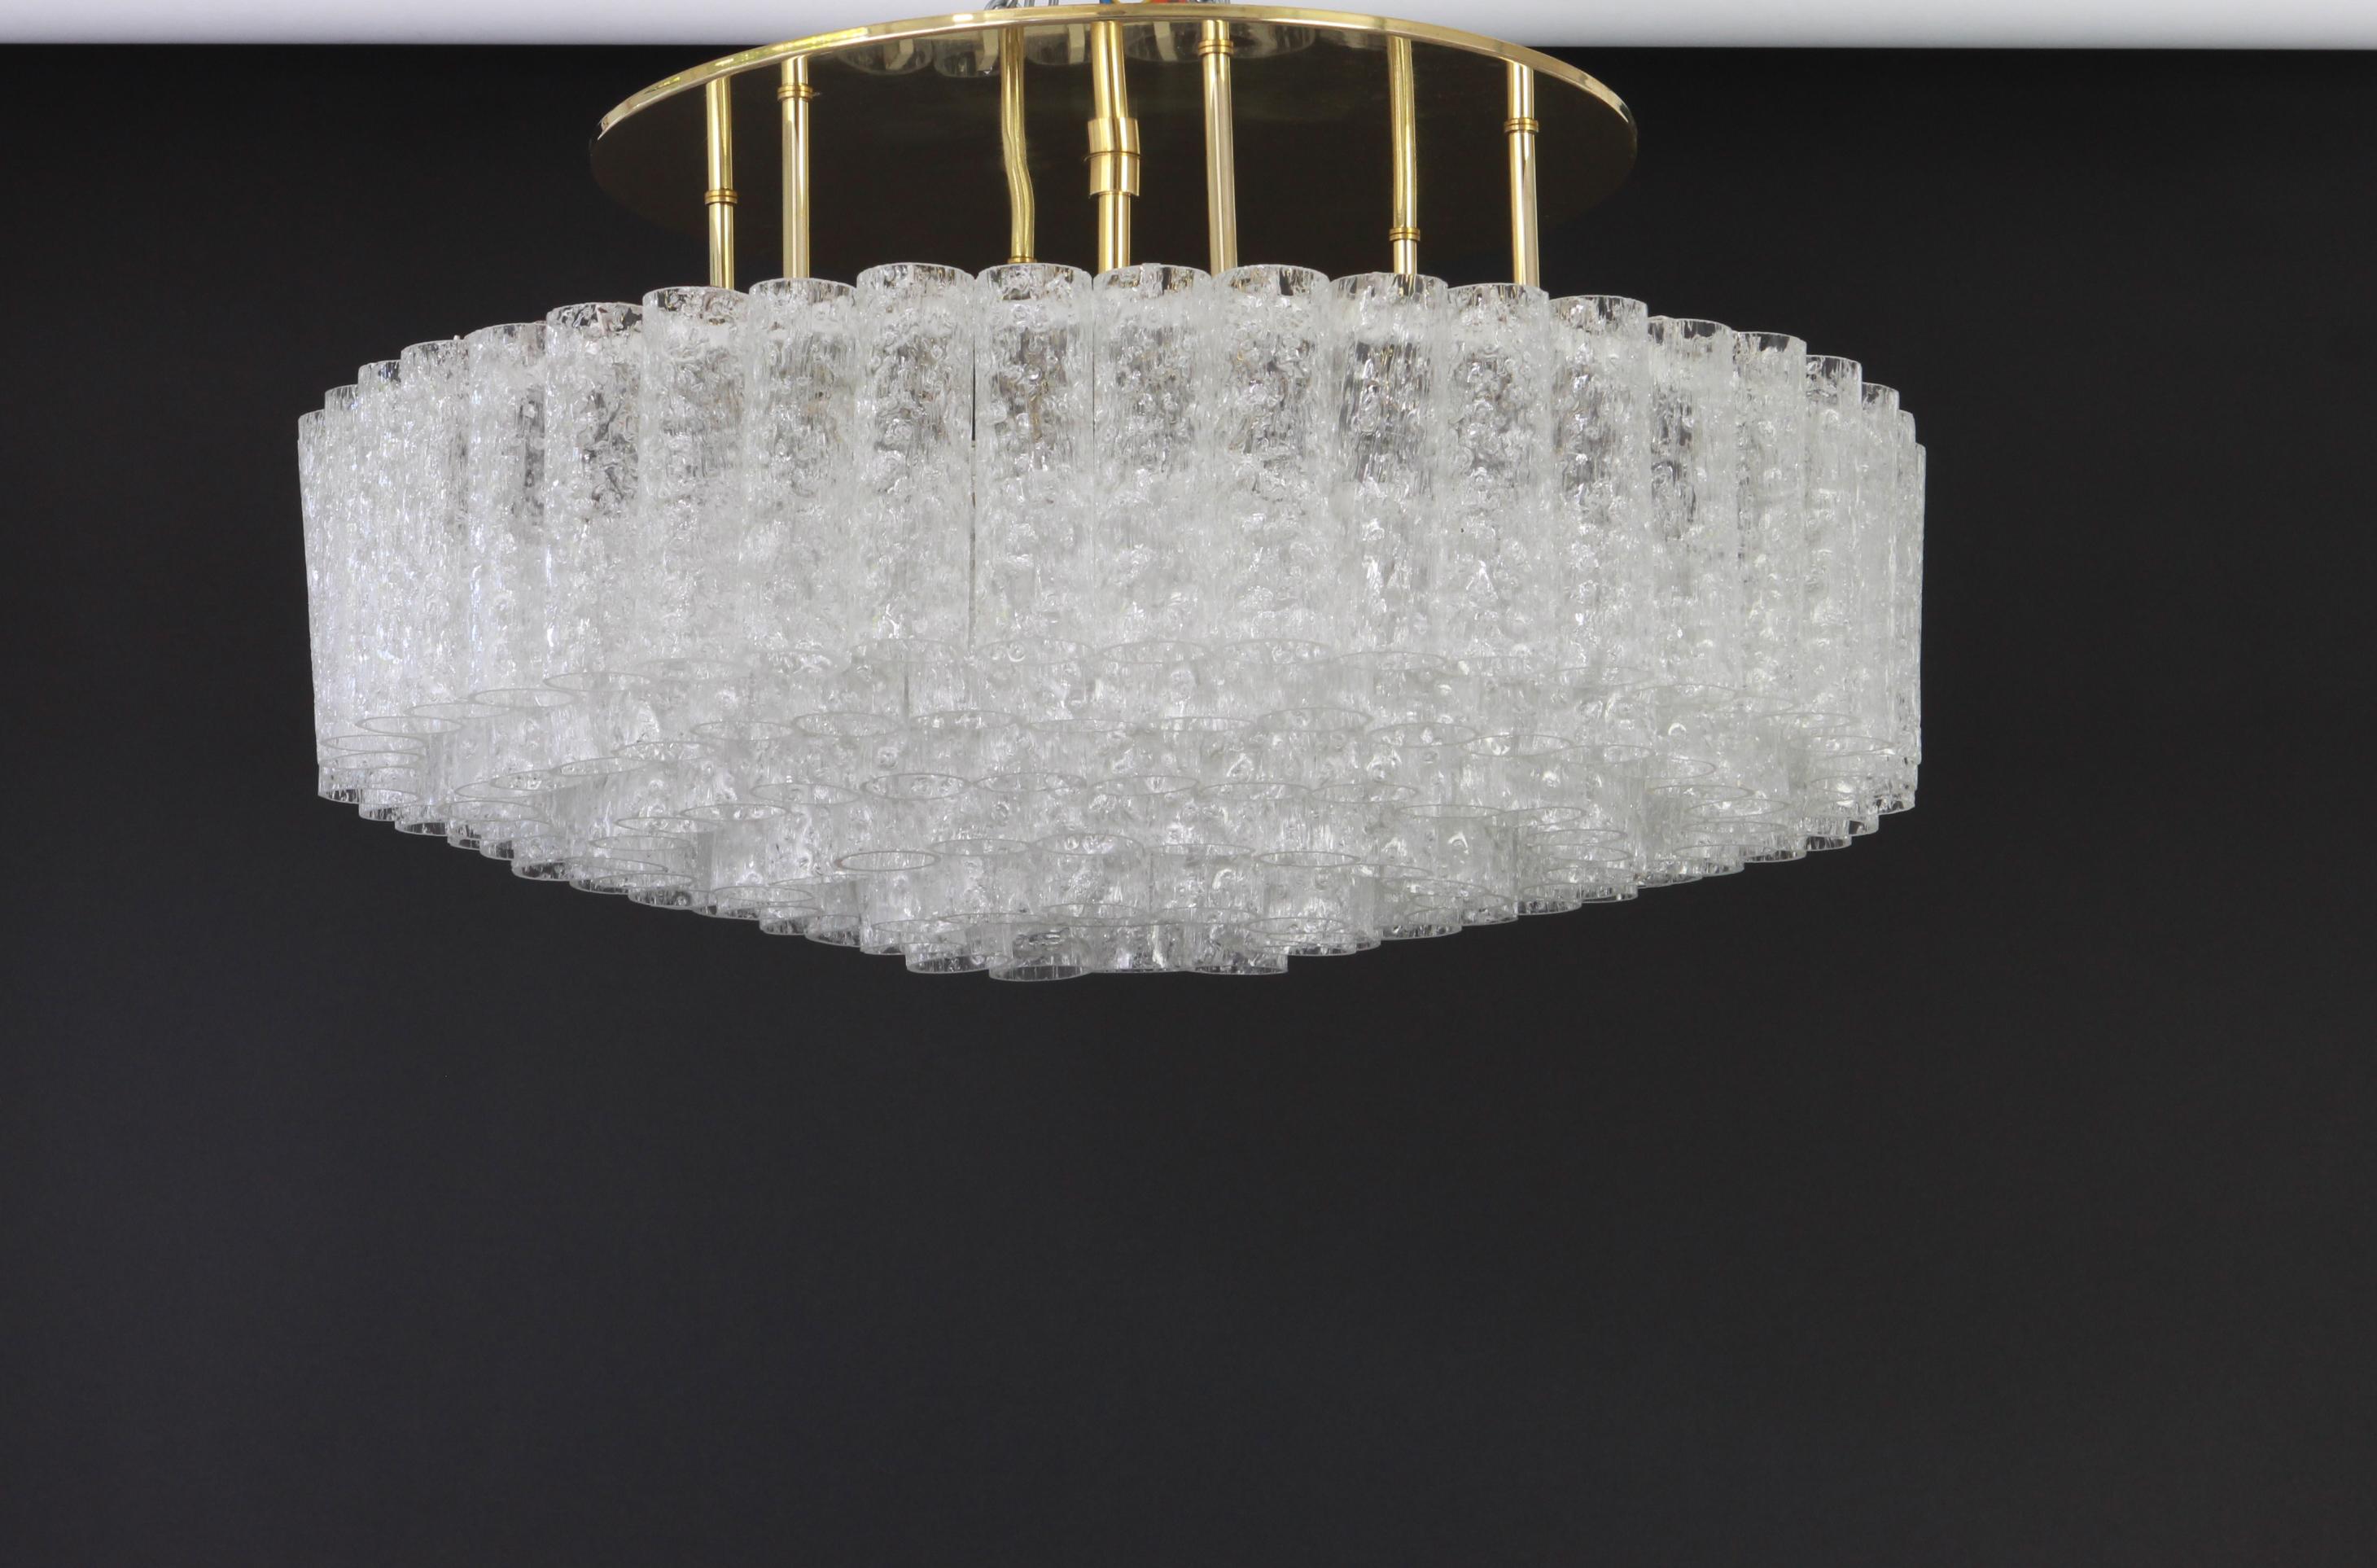 Fantastic five-tier midcentury chandelier by Doria, Germany, manufactured circa 1960-1969. Five rings of Murano glass cylinders suspended from a fixture.

Sockets: 12 x E14 candelabra bulbs //Max.40 watt each + 1 x E27 standard Bulb ( 60